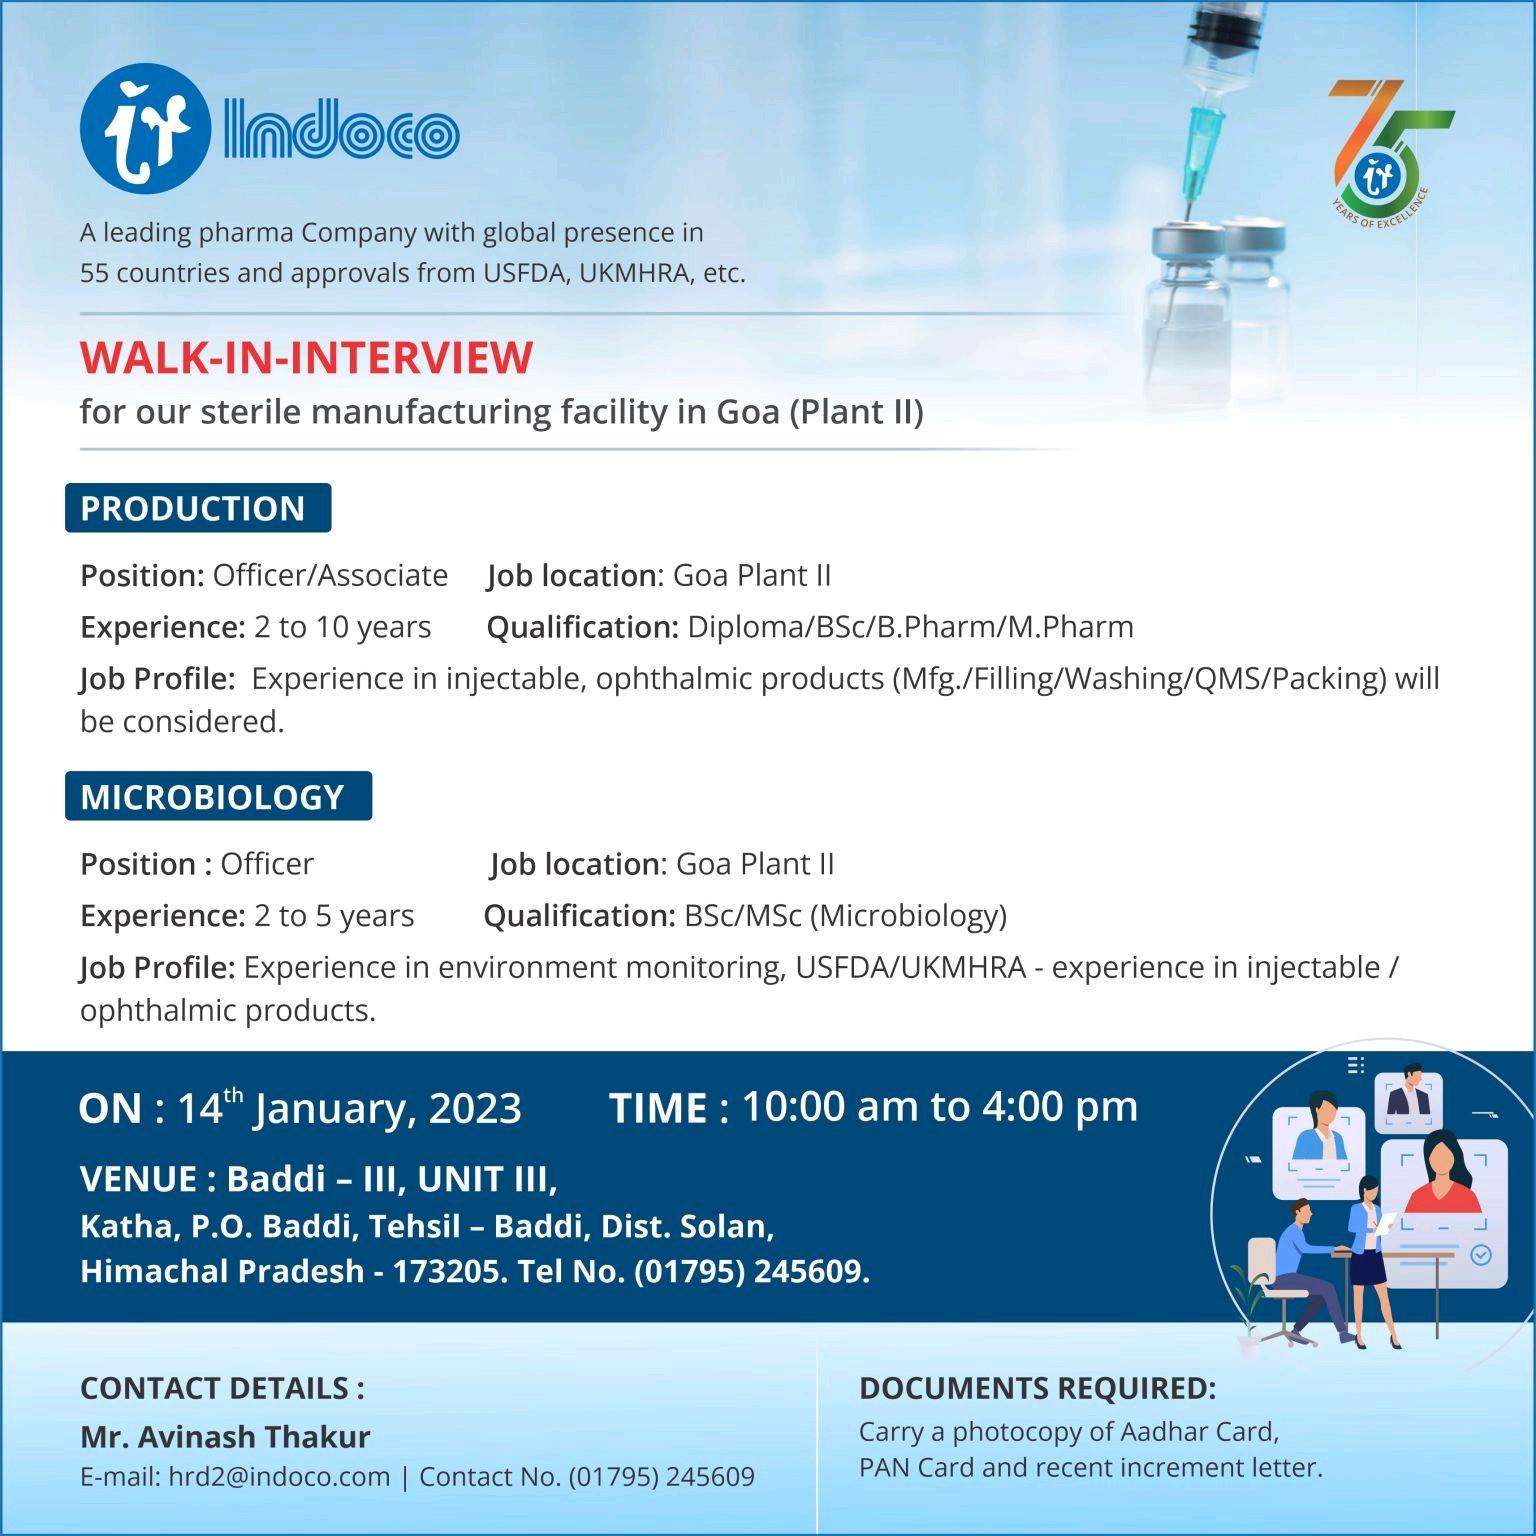 Indoco - Walk In Interview for sterile manufacturing facility in Goa ...